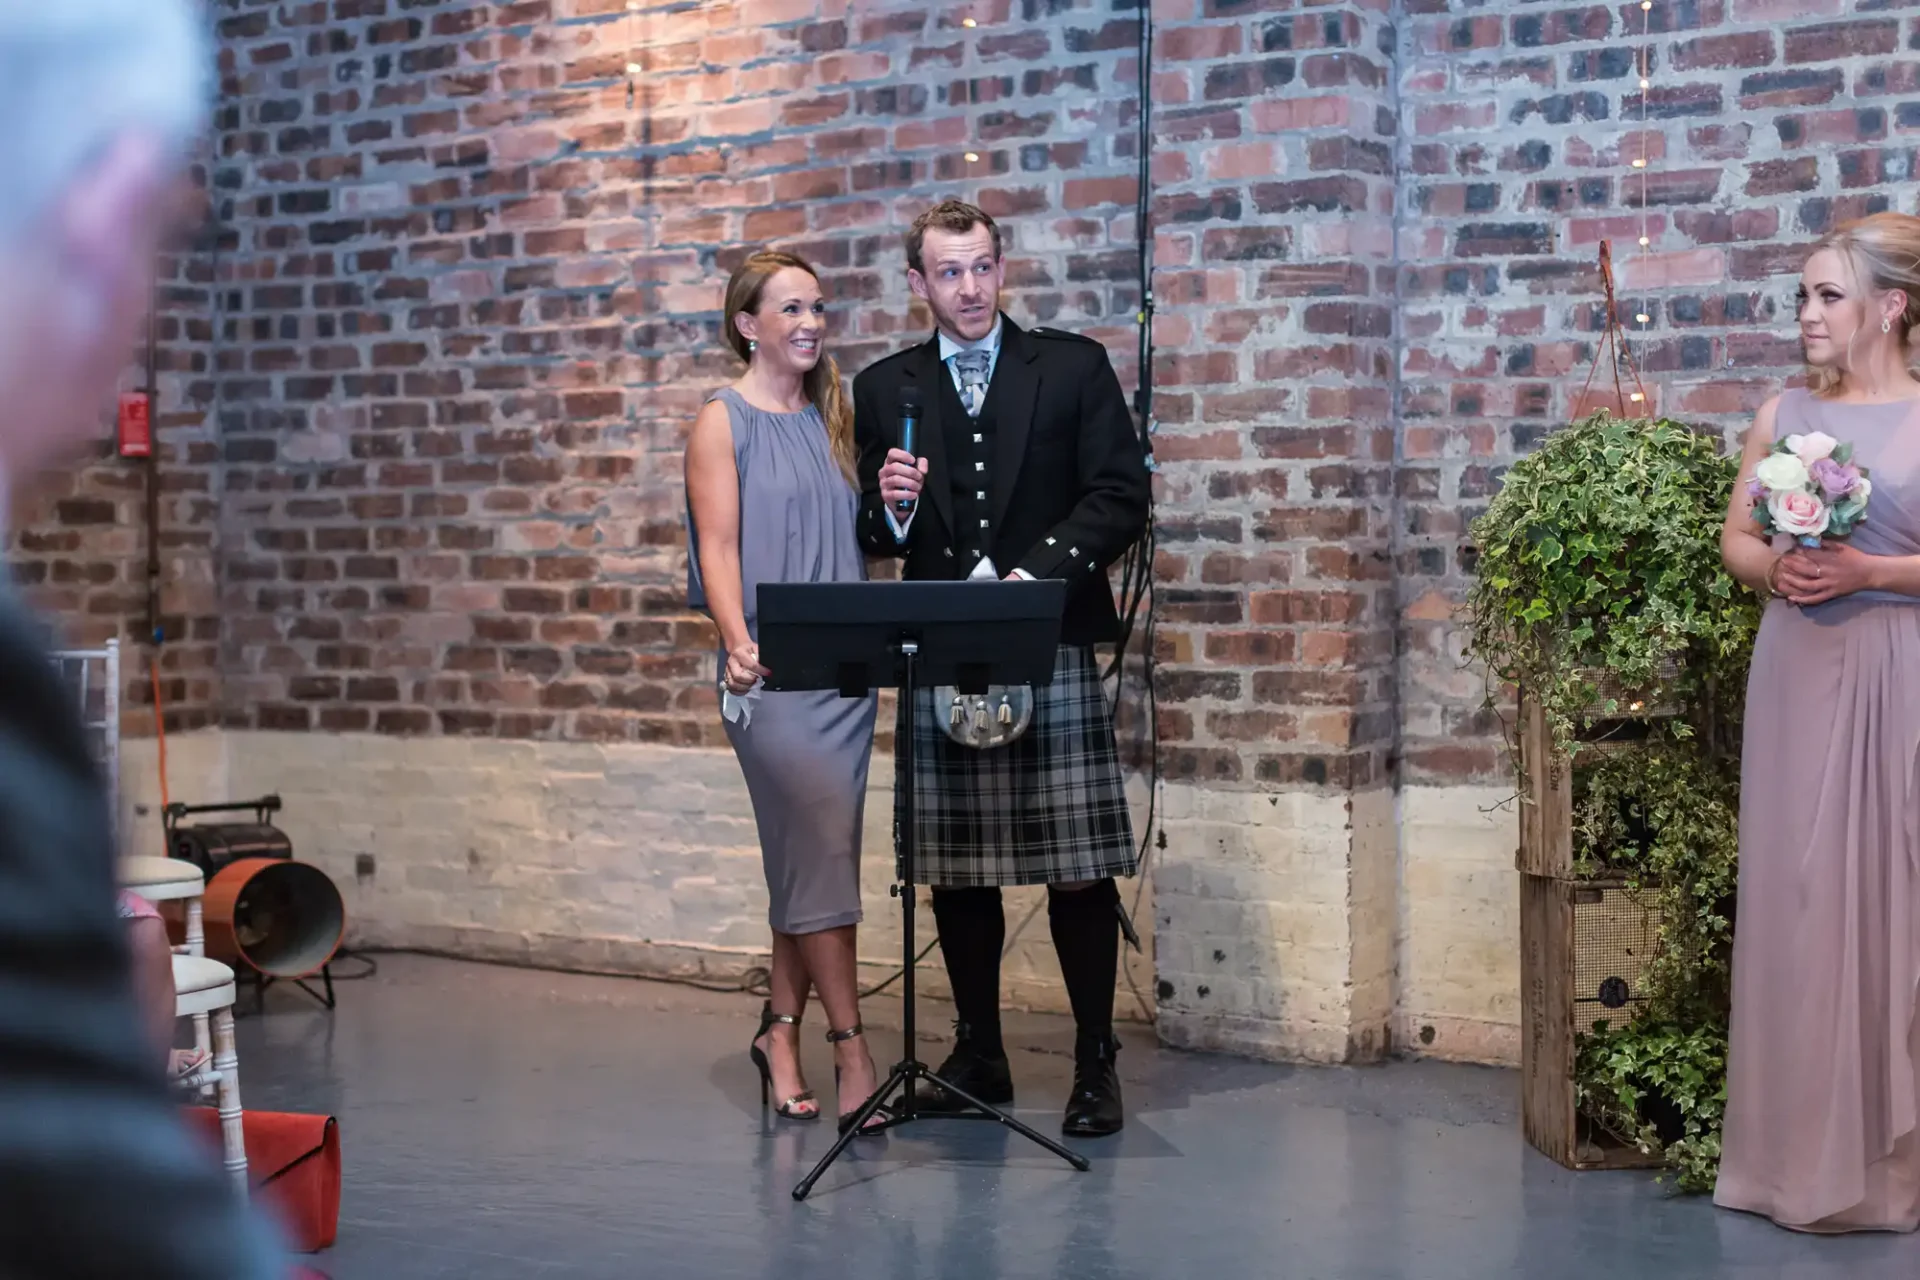 A man in a kilt and a woman in a gray dress speaking at a lectern during a wedding reception, with another woman holding flowers nearby. brick wall in the background.